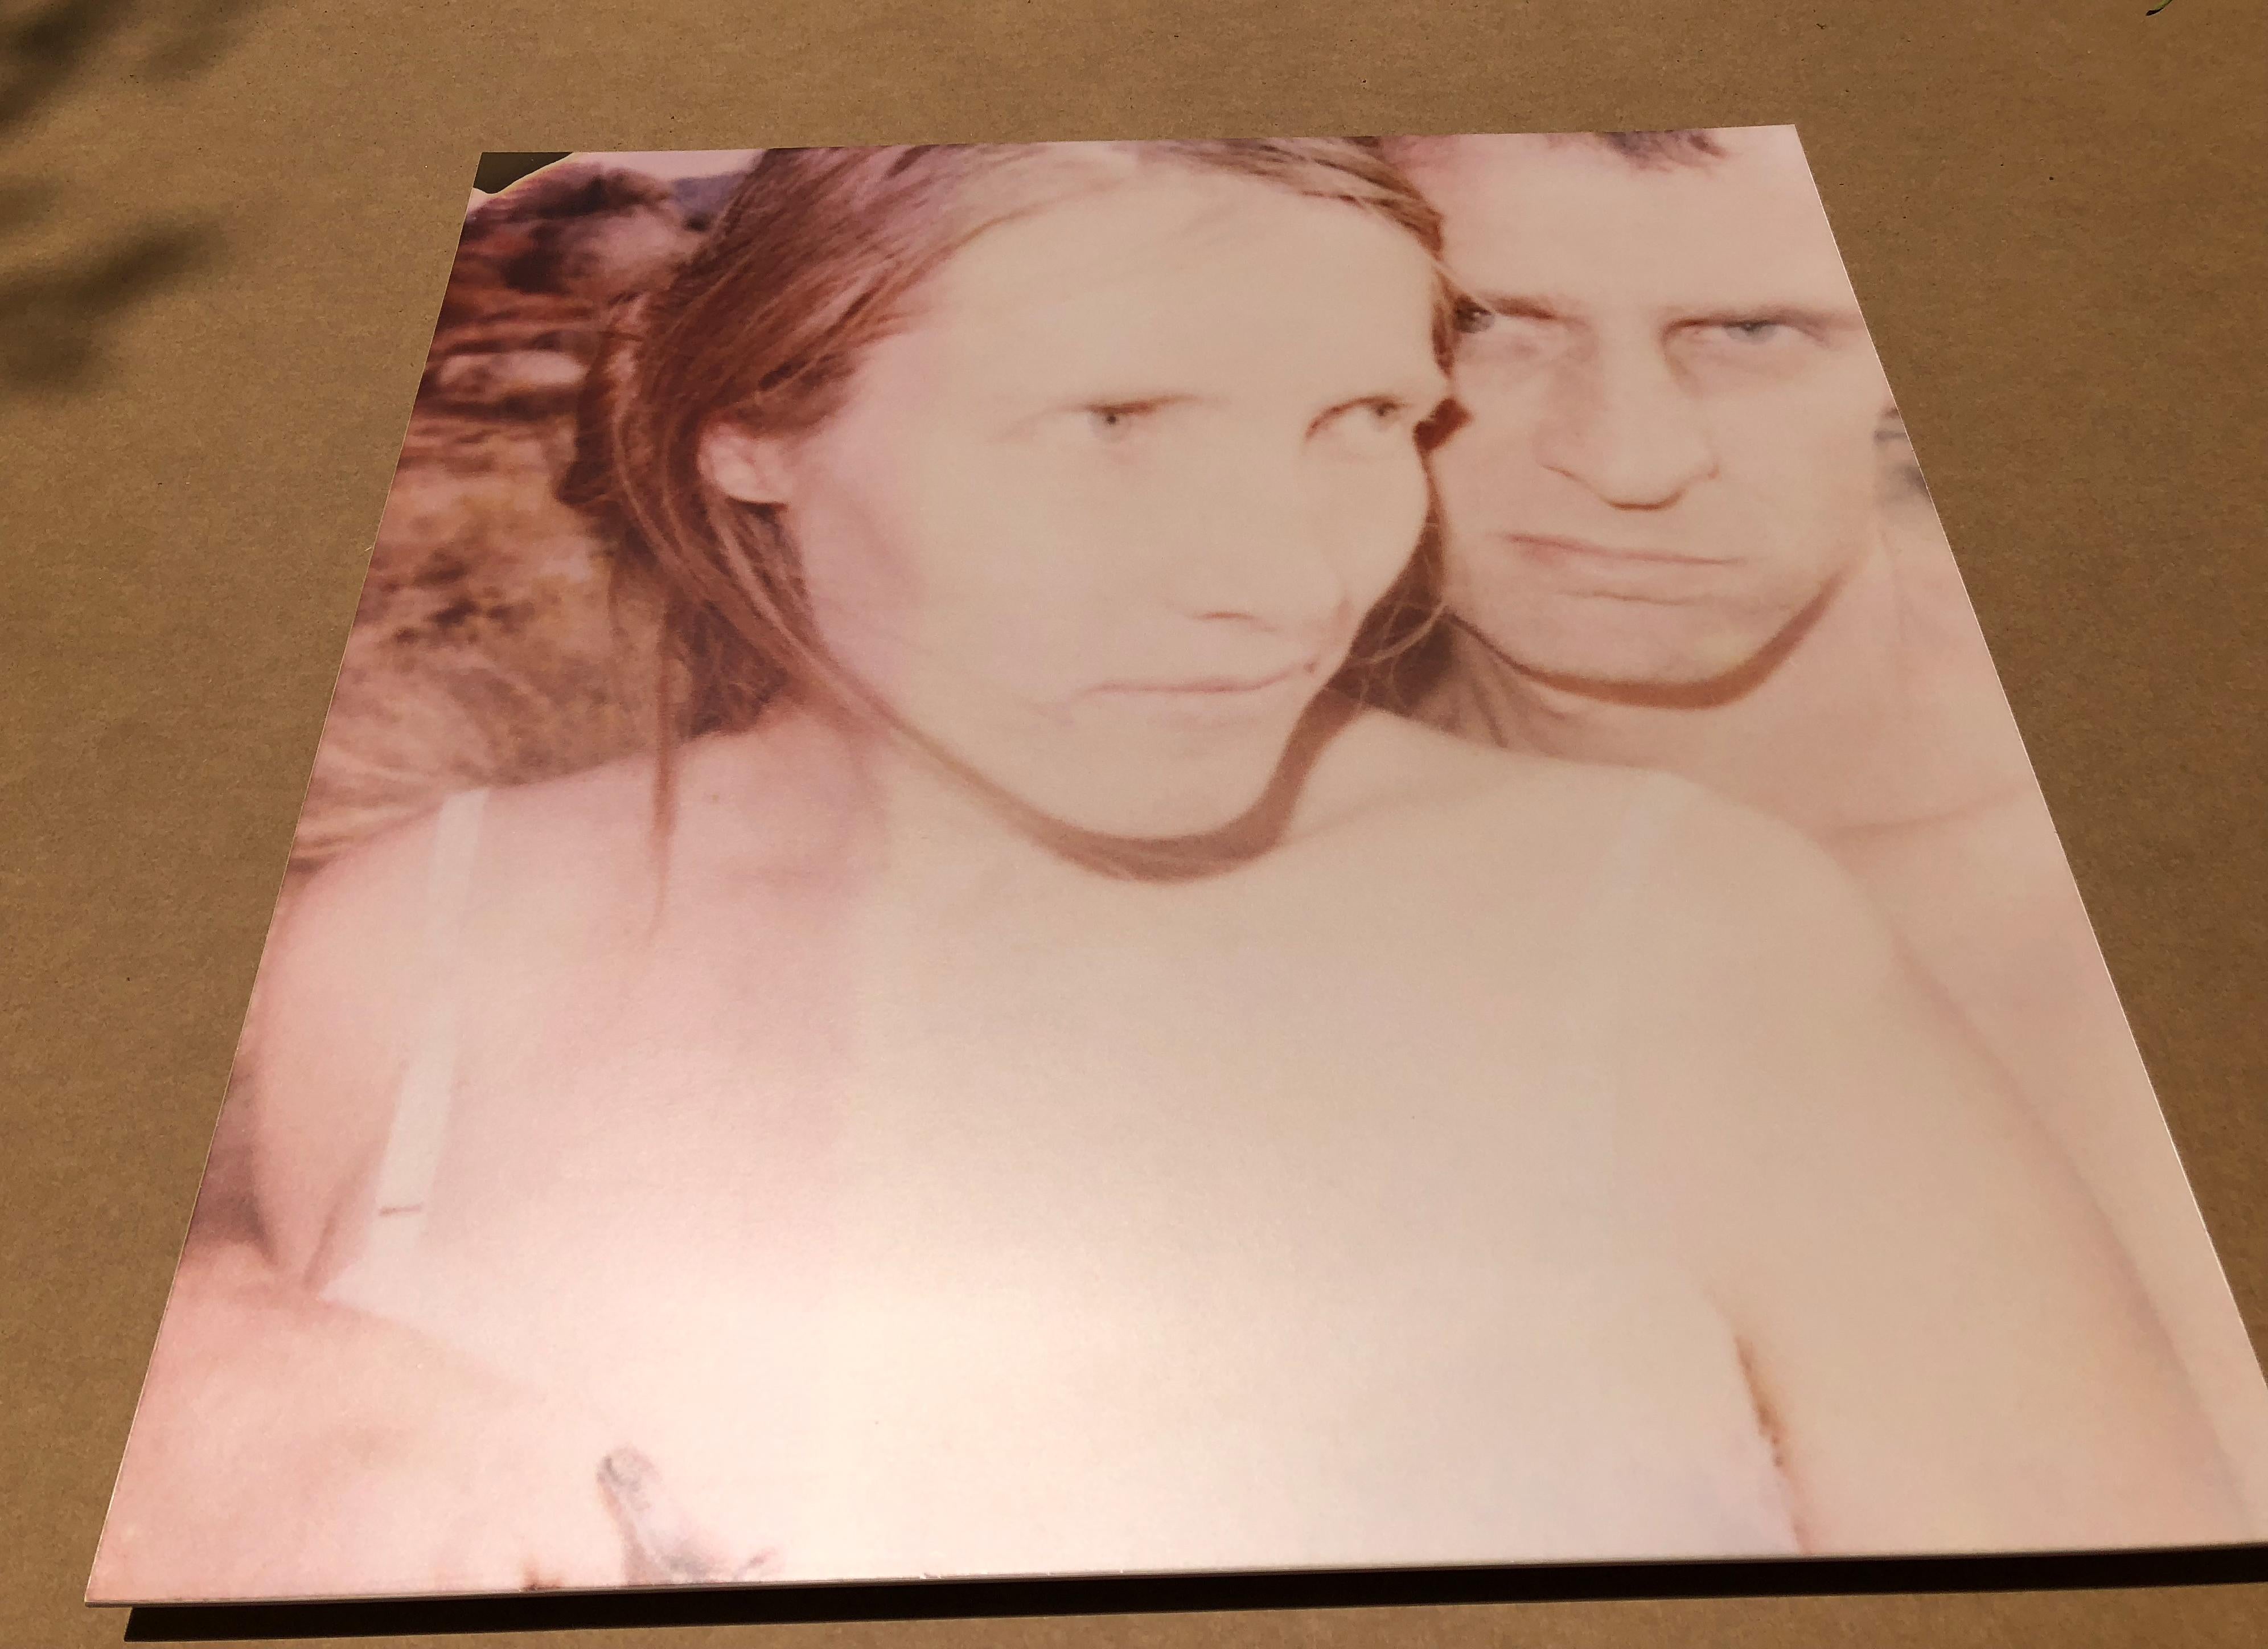 Randy and I - part 1 (Wastelands) - Polaroid, analog, mounted, Contemporary - Beige Color Photograph by Stefanie Schneider